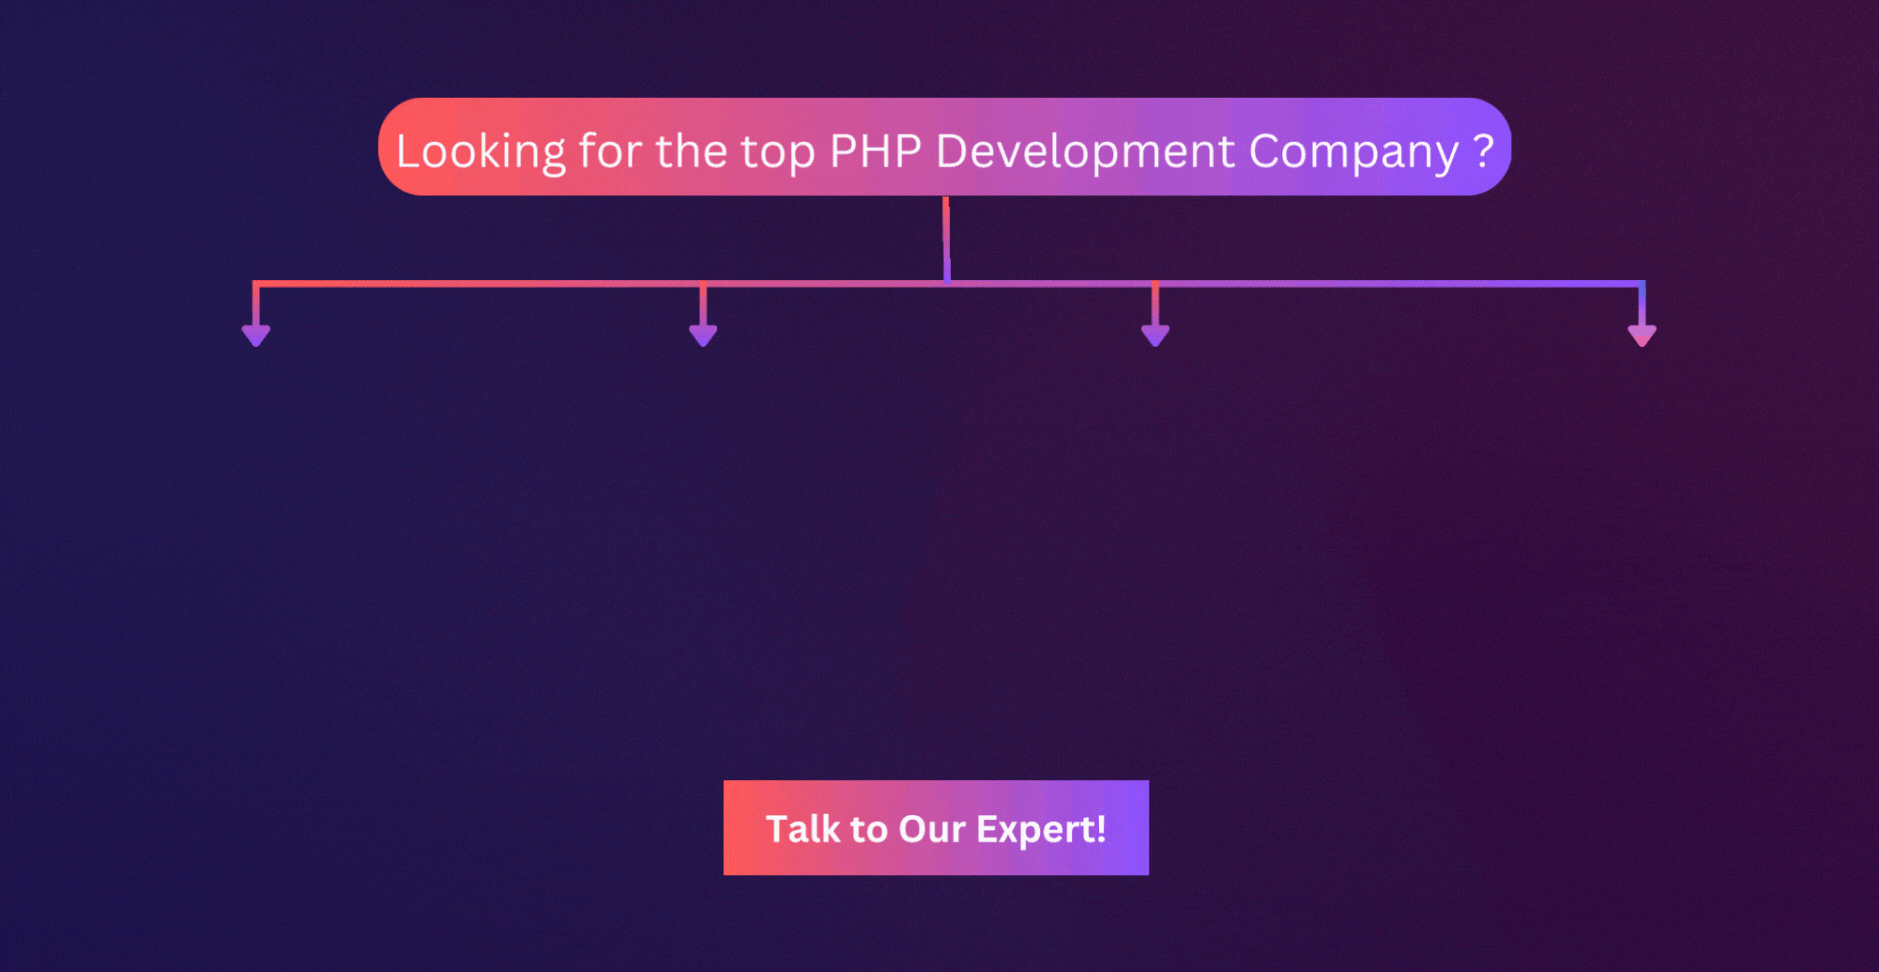  Looking for the top PHP Development Company